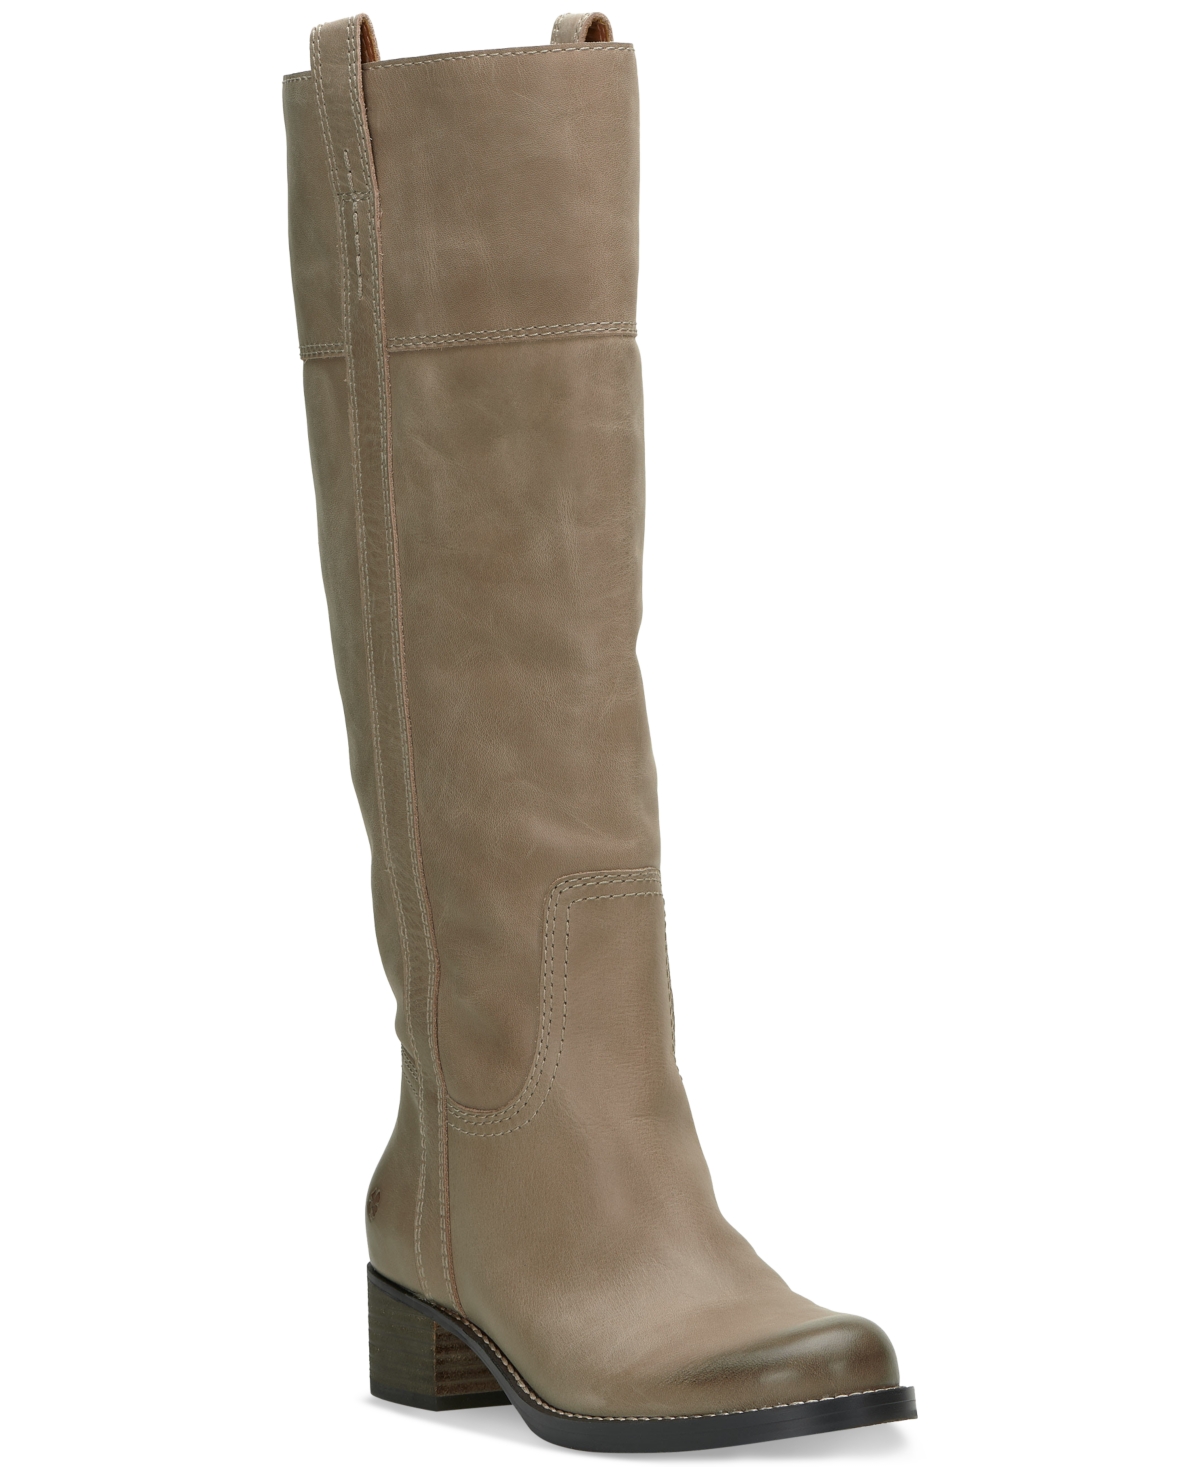 Women's Hybiscus Knee-High Wide-Calf Riding Boots - Silver Cloud Leather